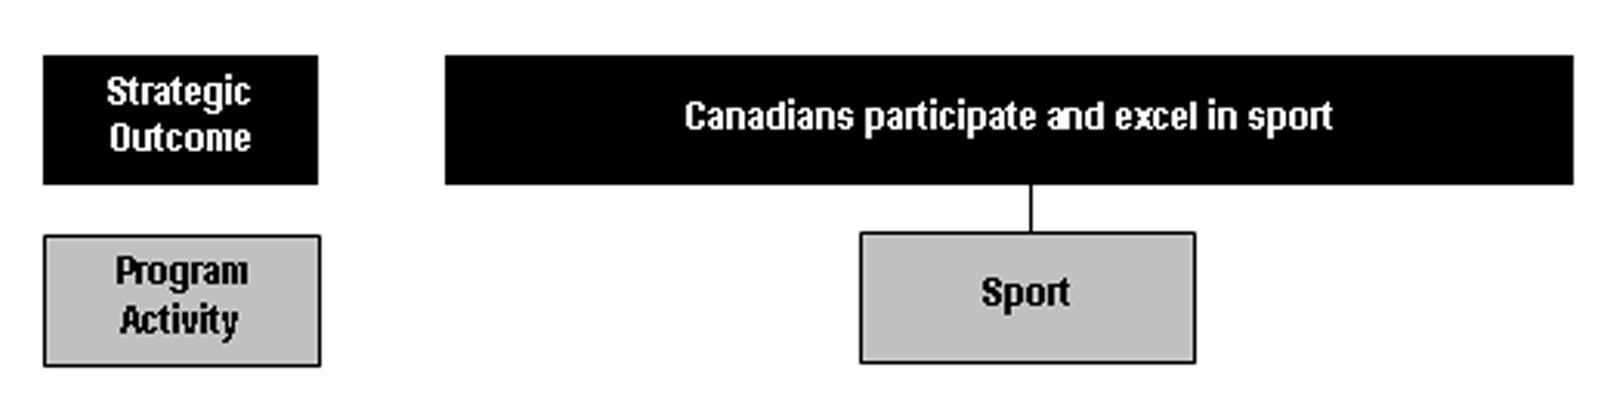 Strategic Outcome #3 - Canadians participate and excel in sport